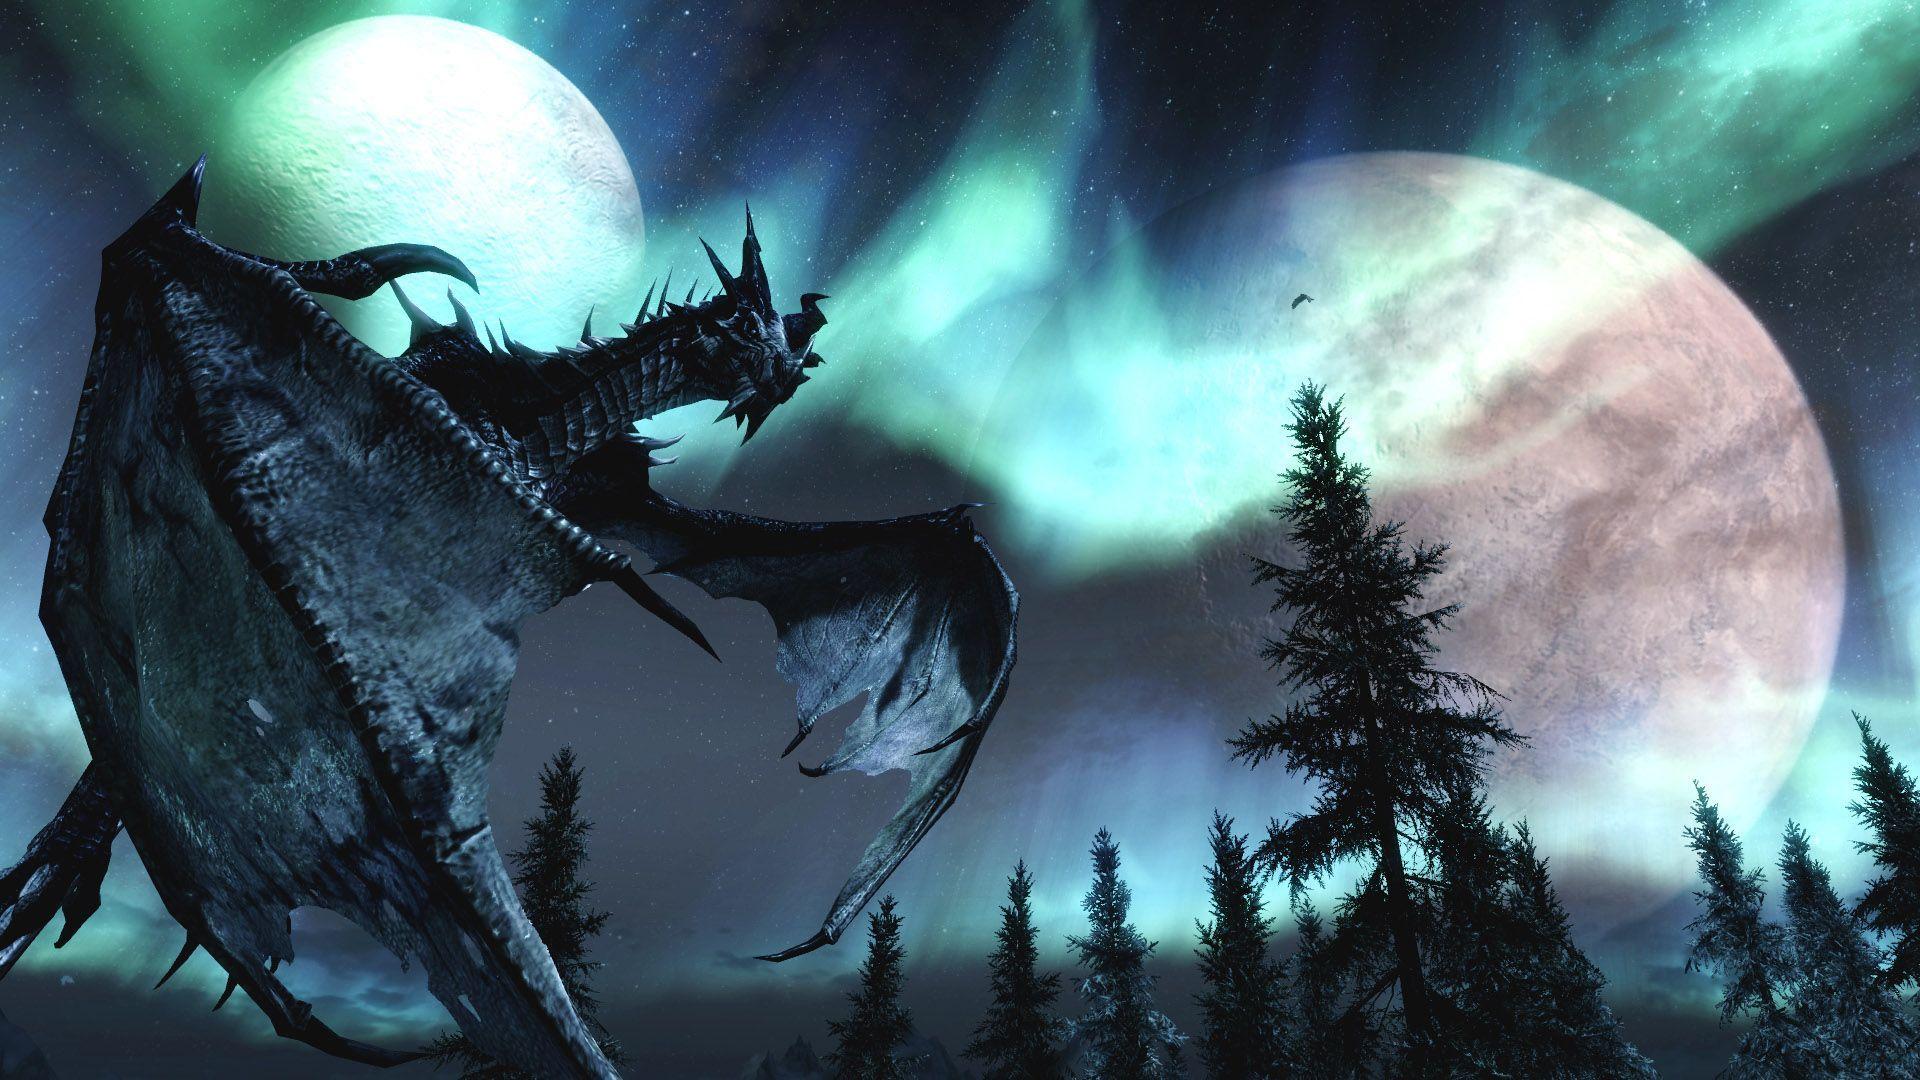 Space Dragon Wallpapers - Top Free Space Dragon Backgrounds ...